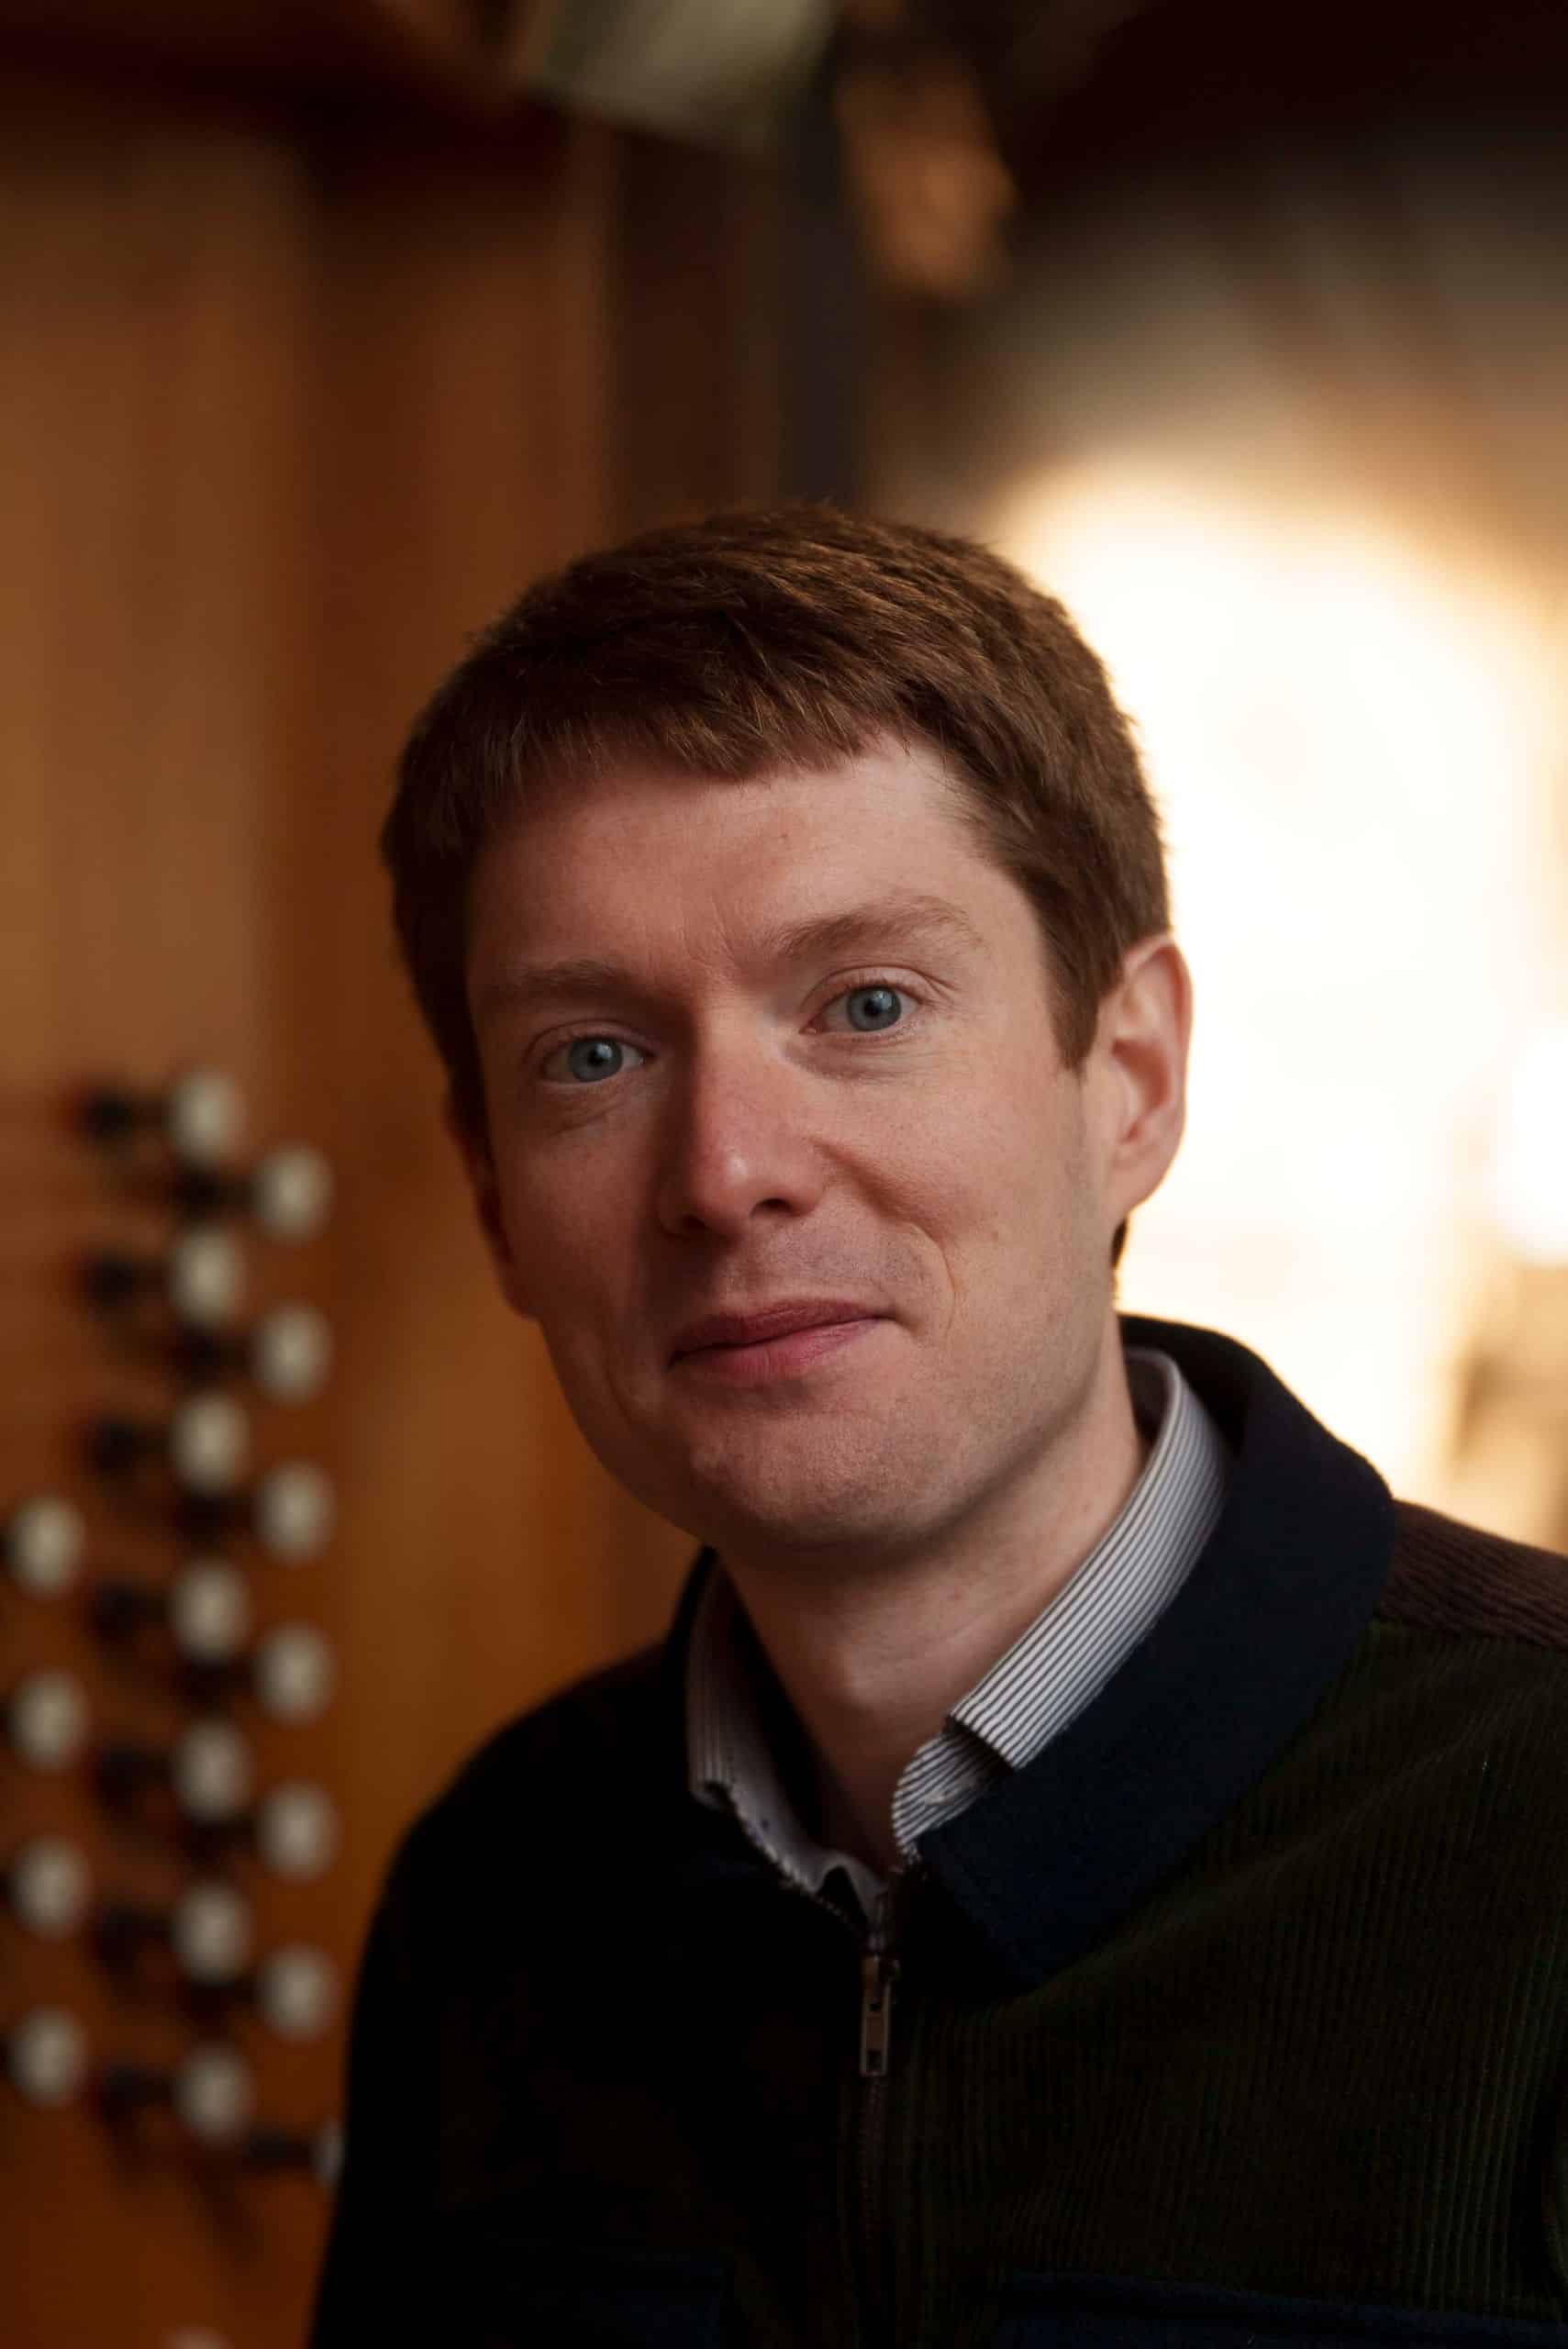 New music director at London’s Temple Church